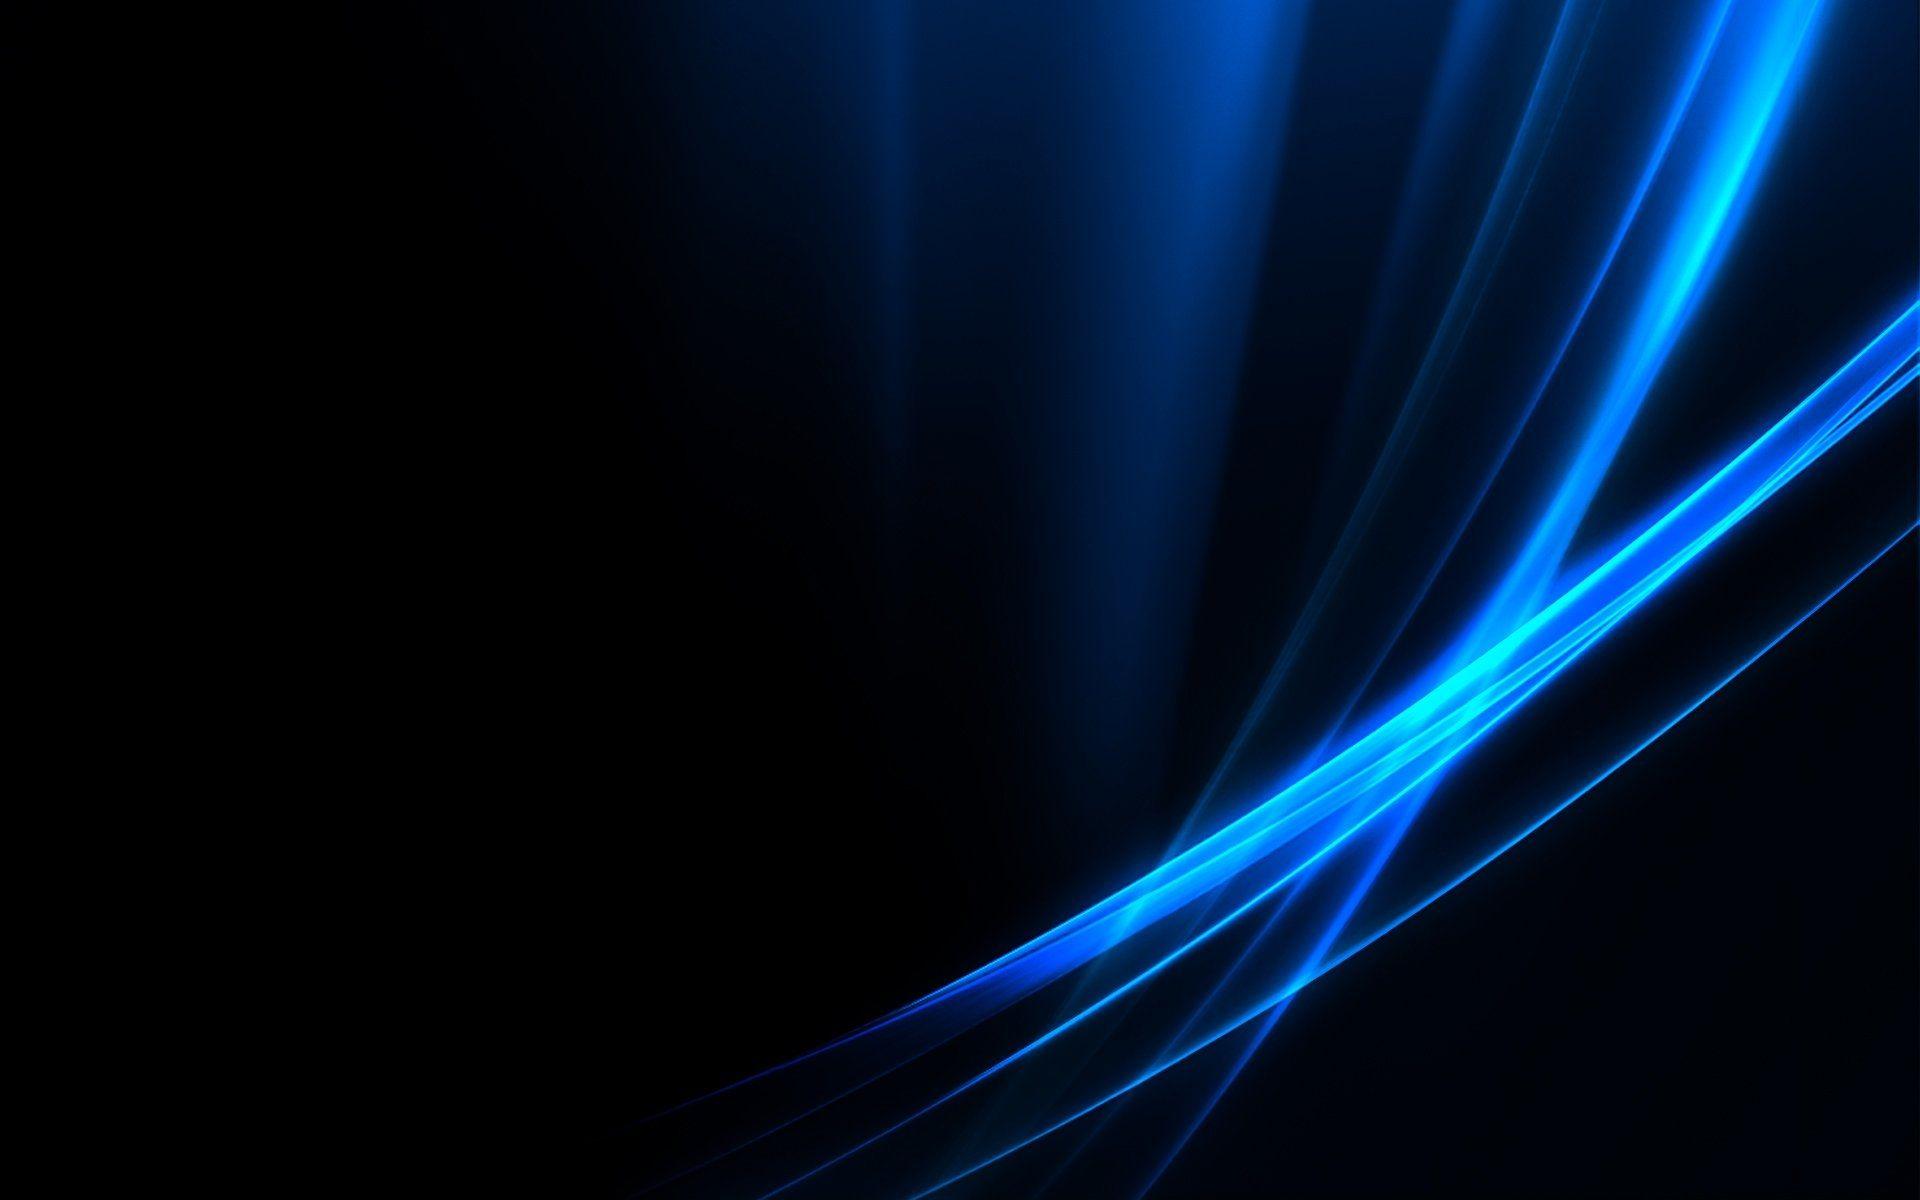 BLACK N Blue Abstract Backgrounds - Wallpaper Cave